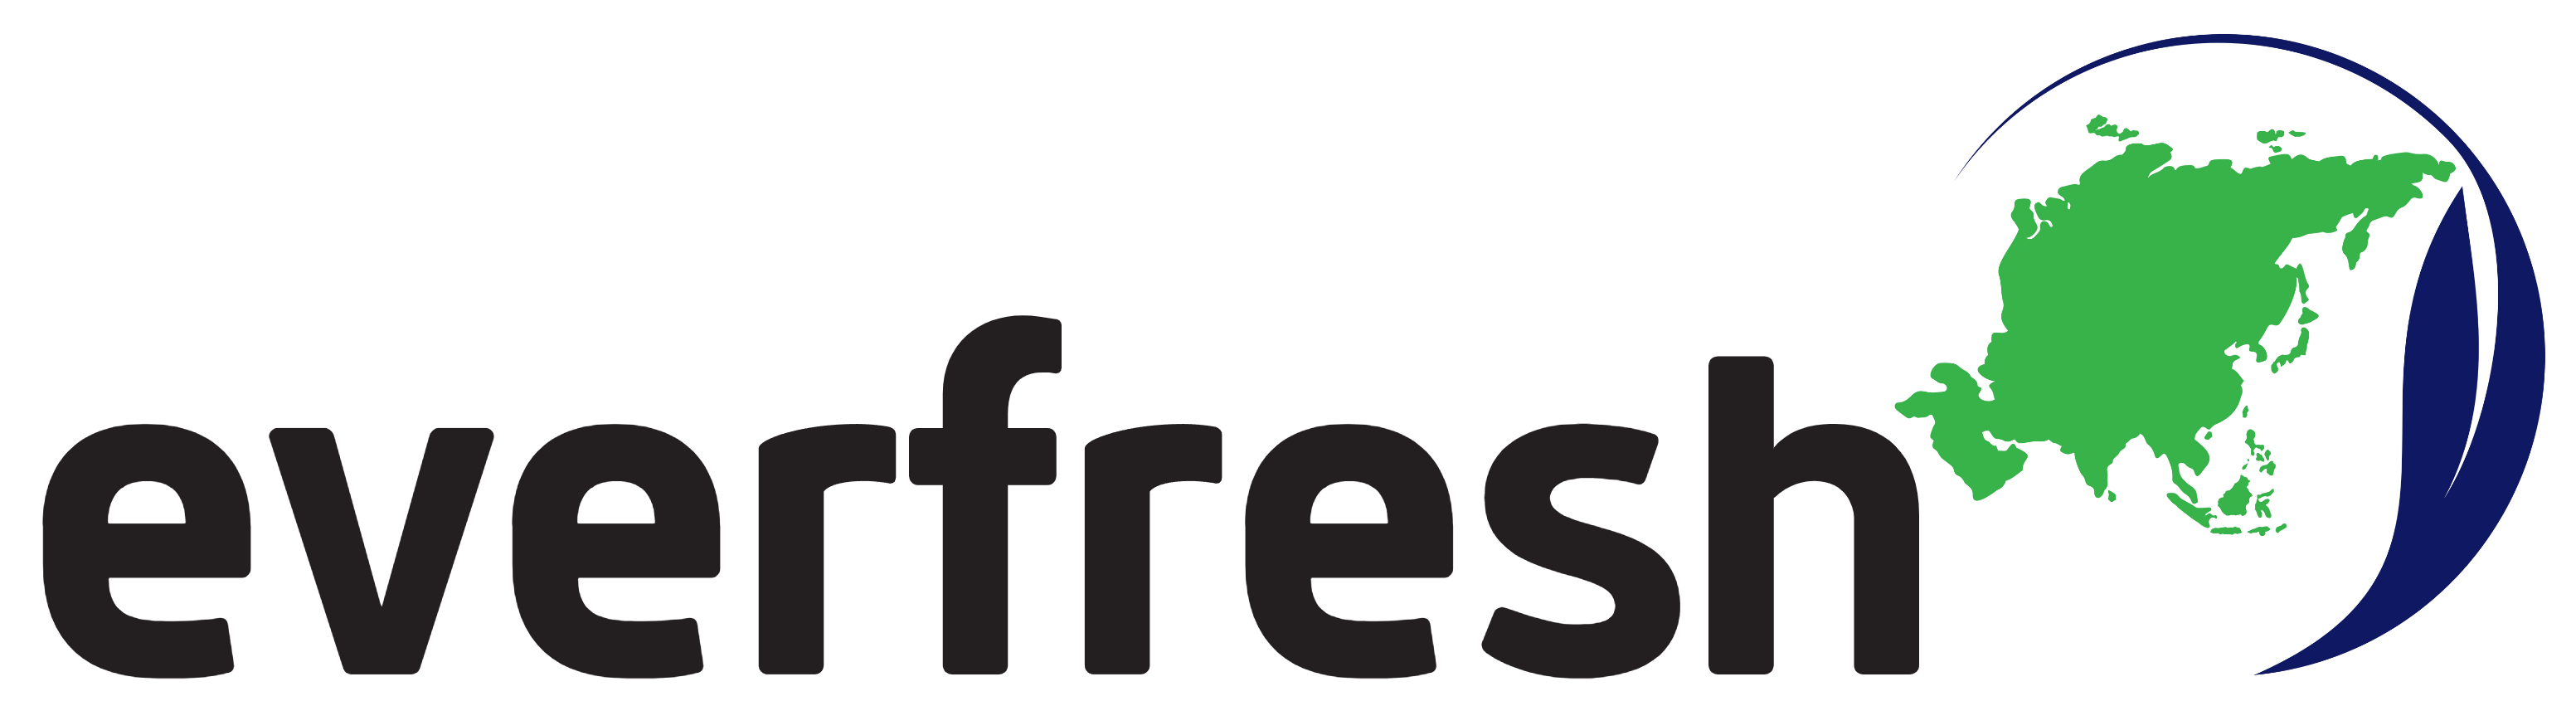 GLOBAL EVERFRESH TRADING CO., LIMITED